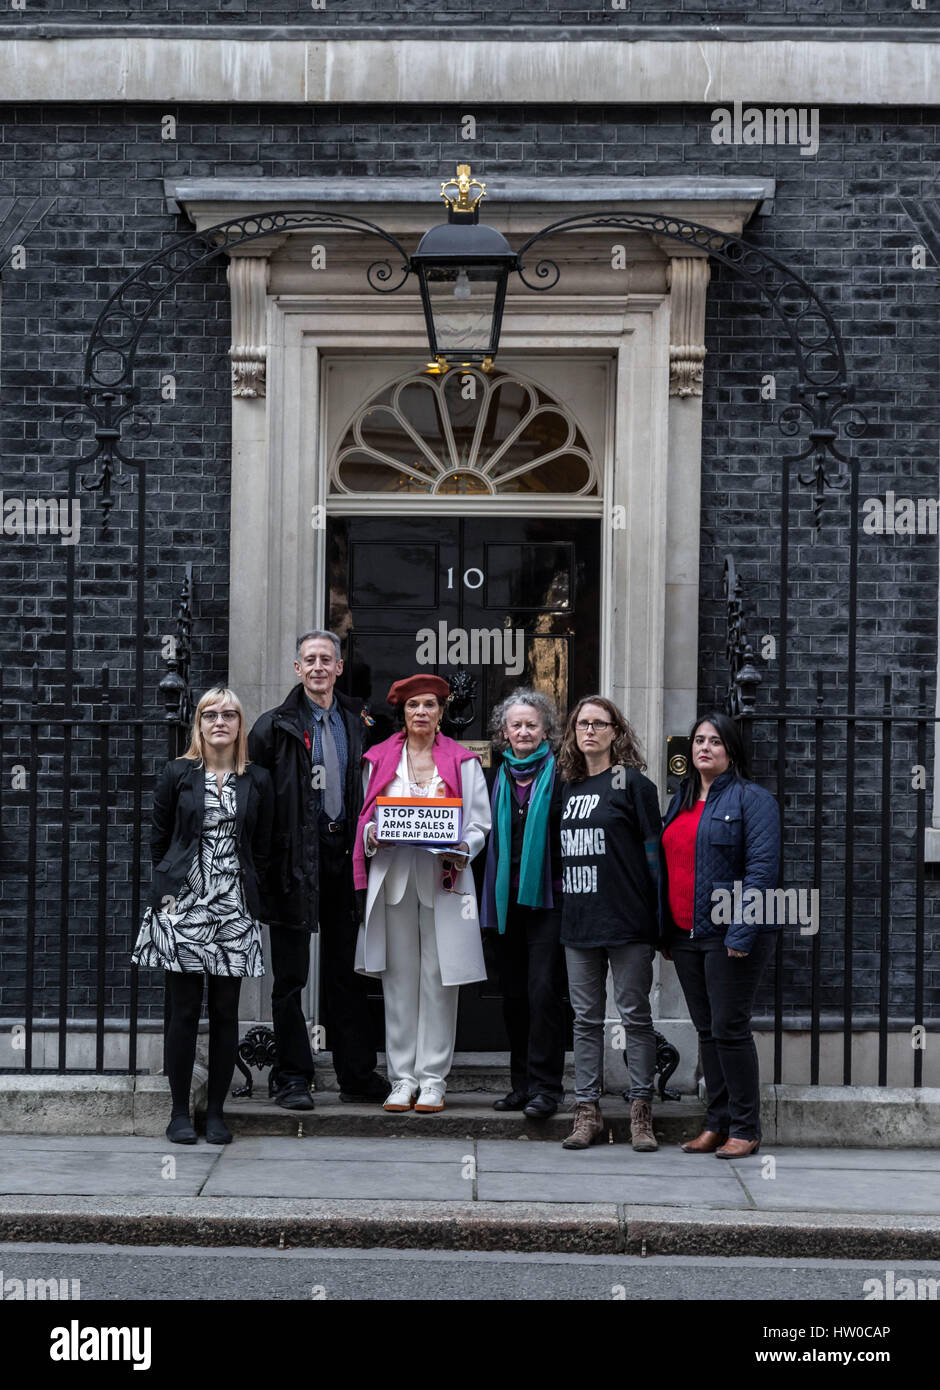 London, UK. 15th Mar, 2017. Bianca Jagger joins Human Rights campaigner Peter Tatchell with Green Party's Jenny Jones to hand in a 159,000-signature petition to Prime Minister Theresa May at 10 Downing Street. The petition, organised by Peter Tatchell, urges the UK government to halt arms sales to Saudi Arabia over its war crimes to Yemen and its jailing of blogger Raif Badawi and other political prisoners. Credit: Guy Corbishley/Alamy Live News Stock Photo